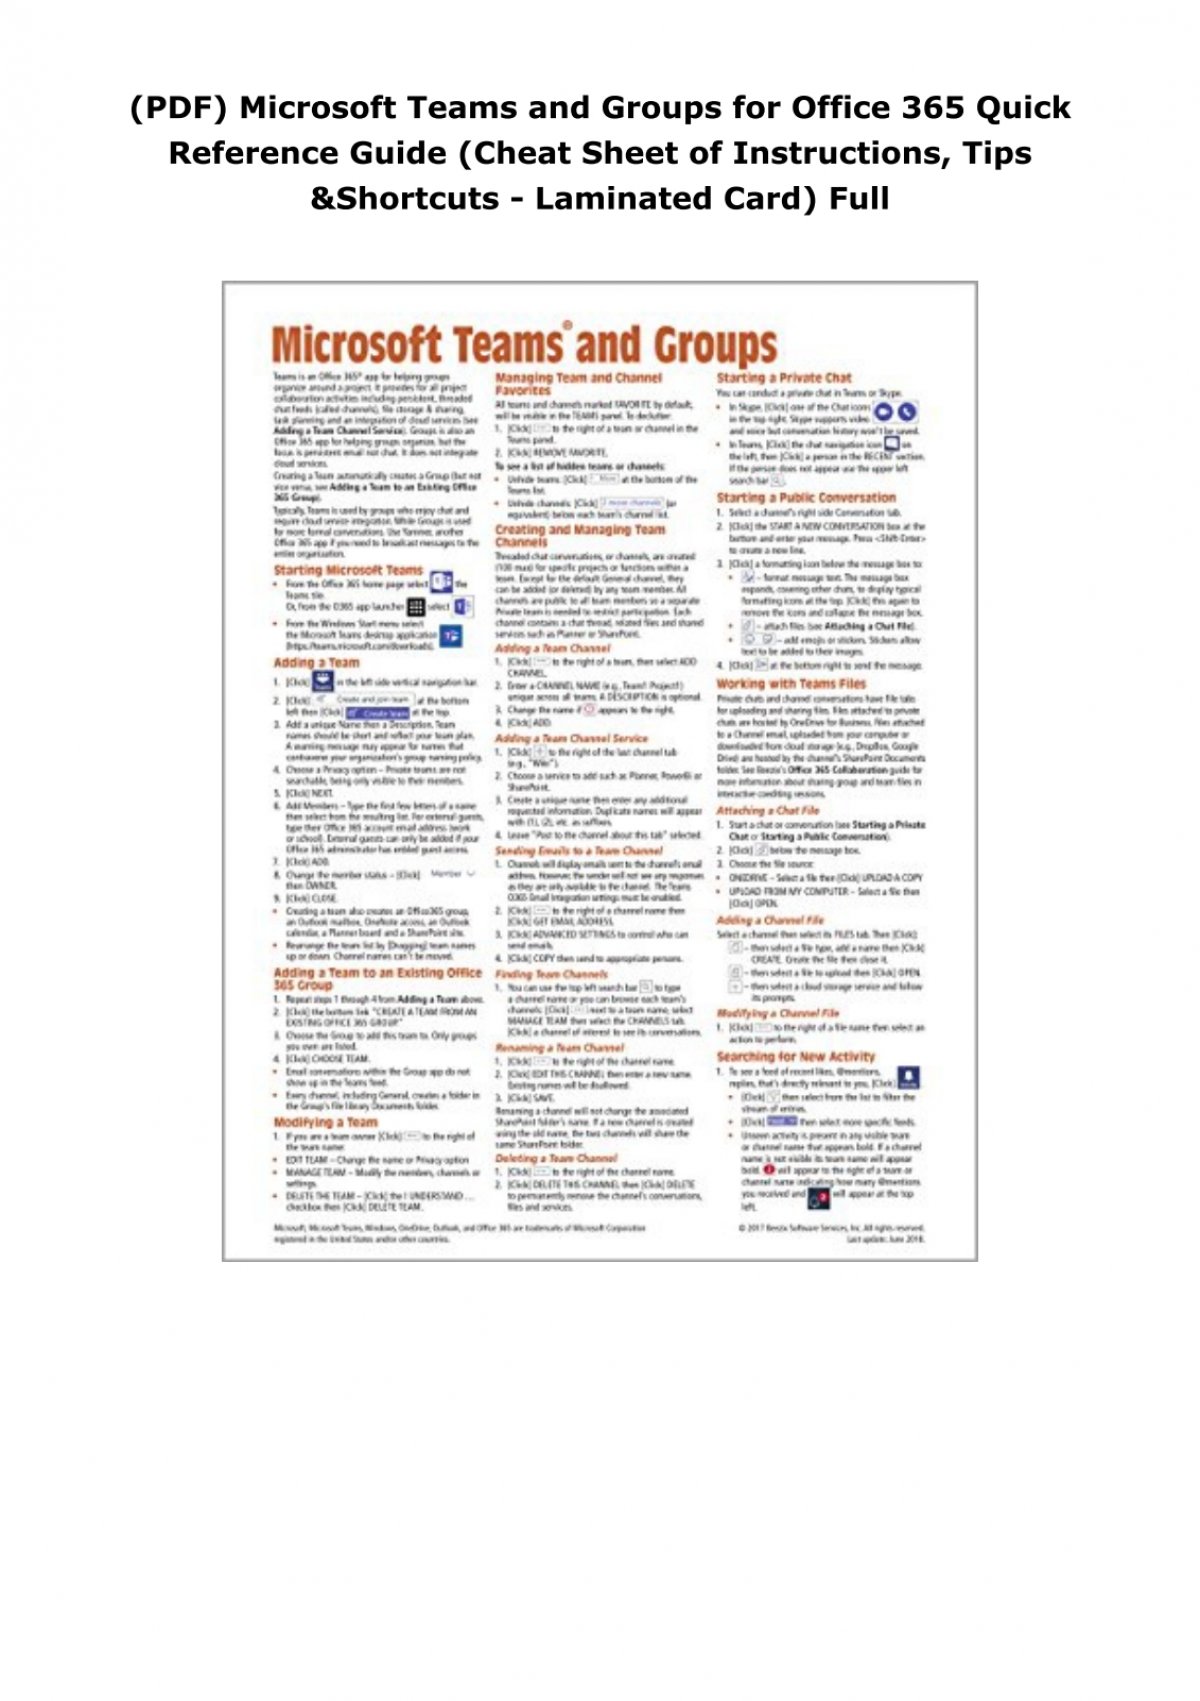 Pdf Microsoft Teams And Groups For Office 365 Quick Reference Guide Cheat Sheet Of 8119